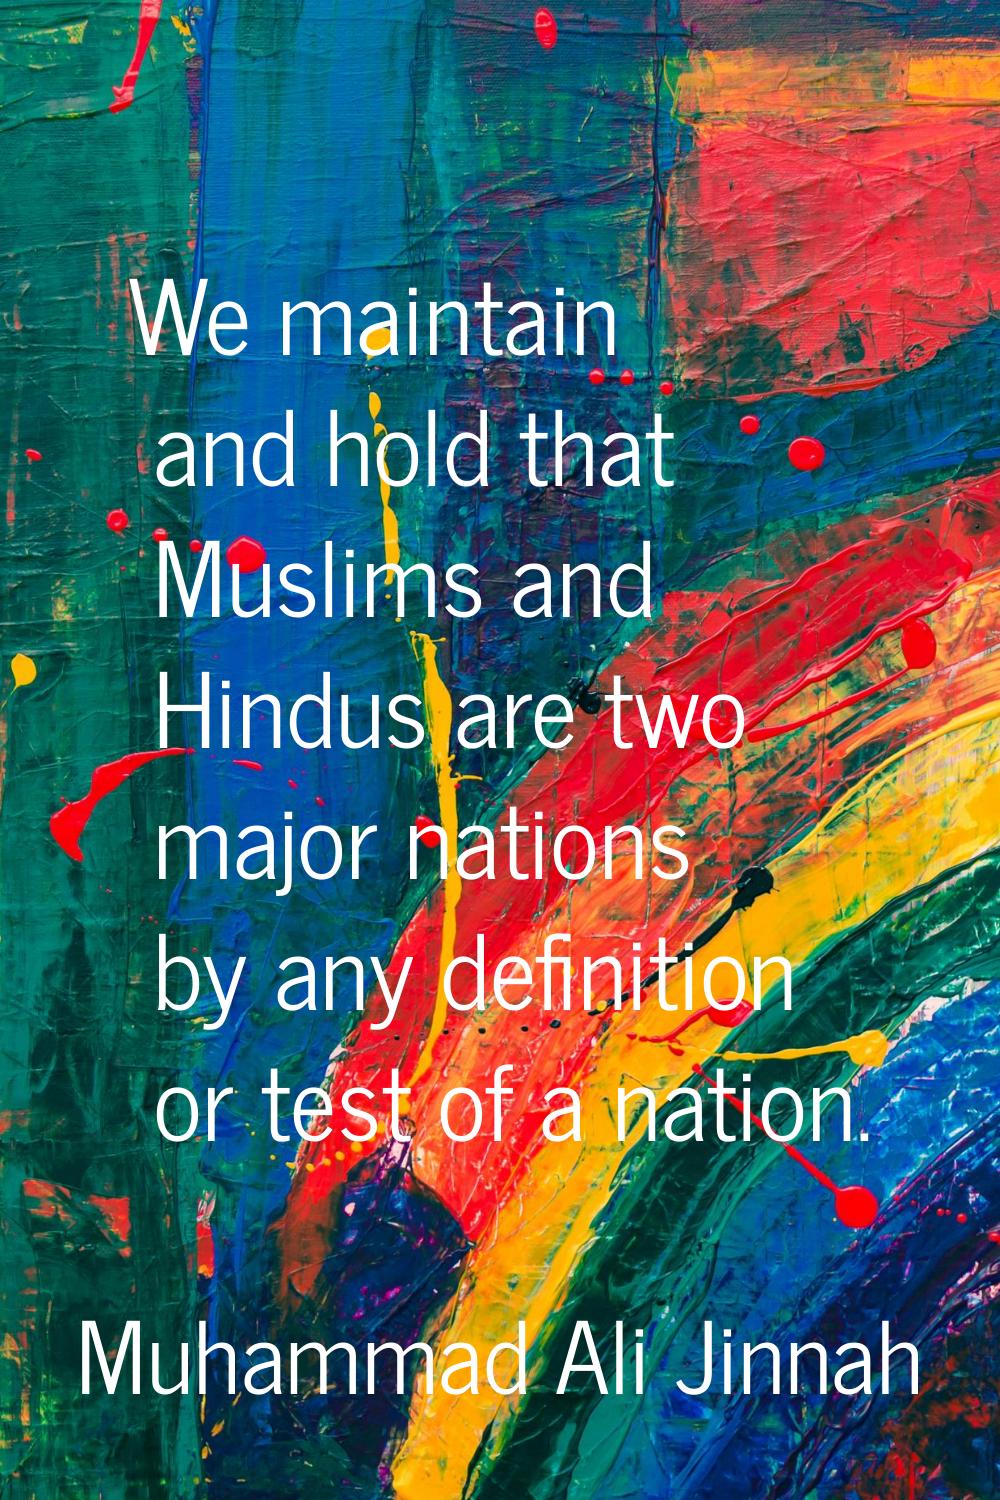 We maintain and hold that Muslims and Hindus are two major nations by any definition or test of a n